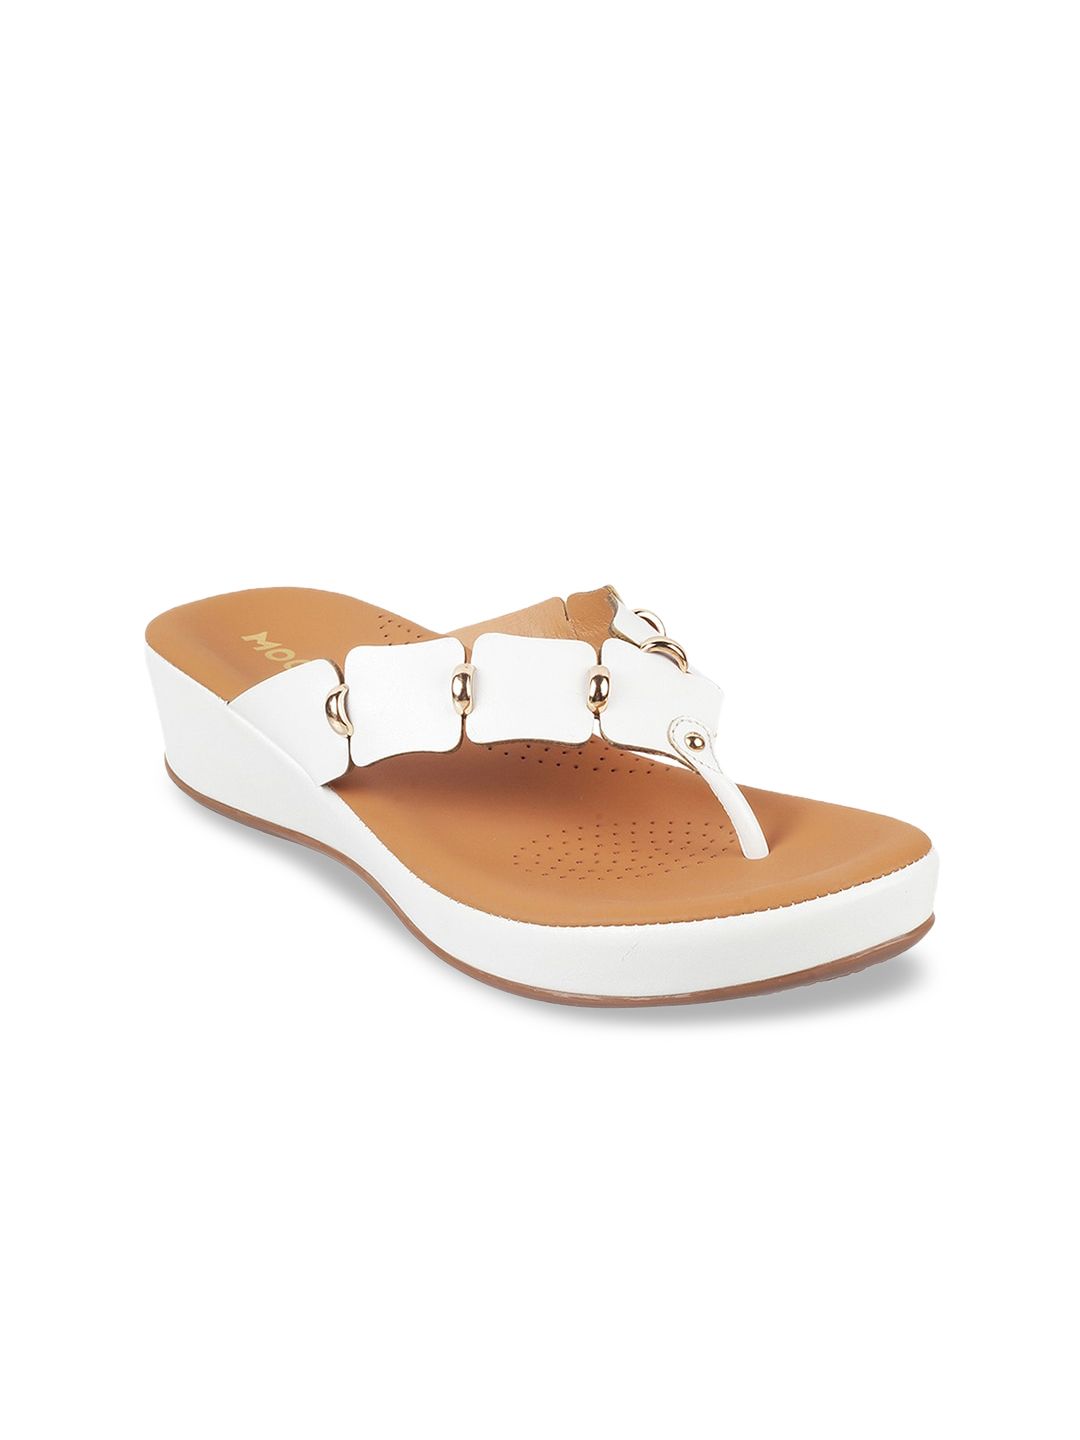 Mochi White Wedge Sandals Price in India